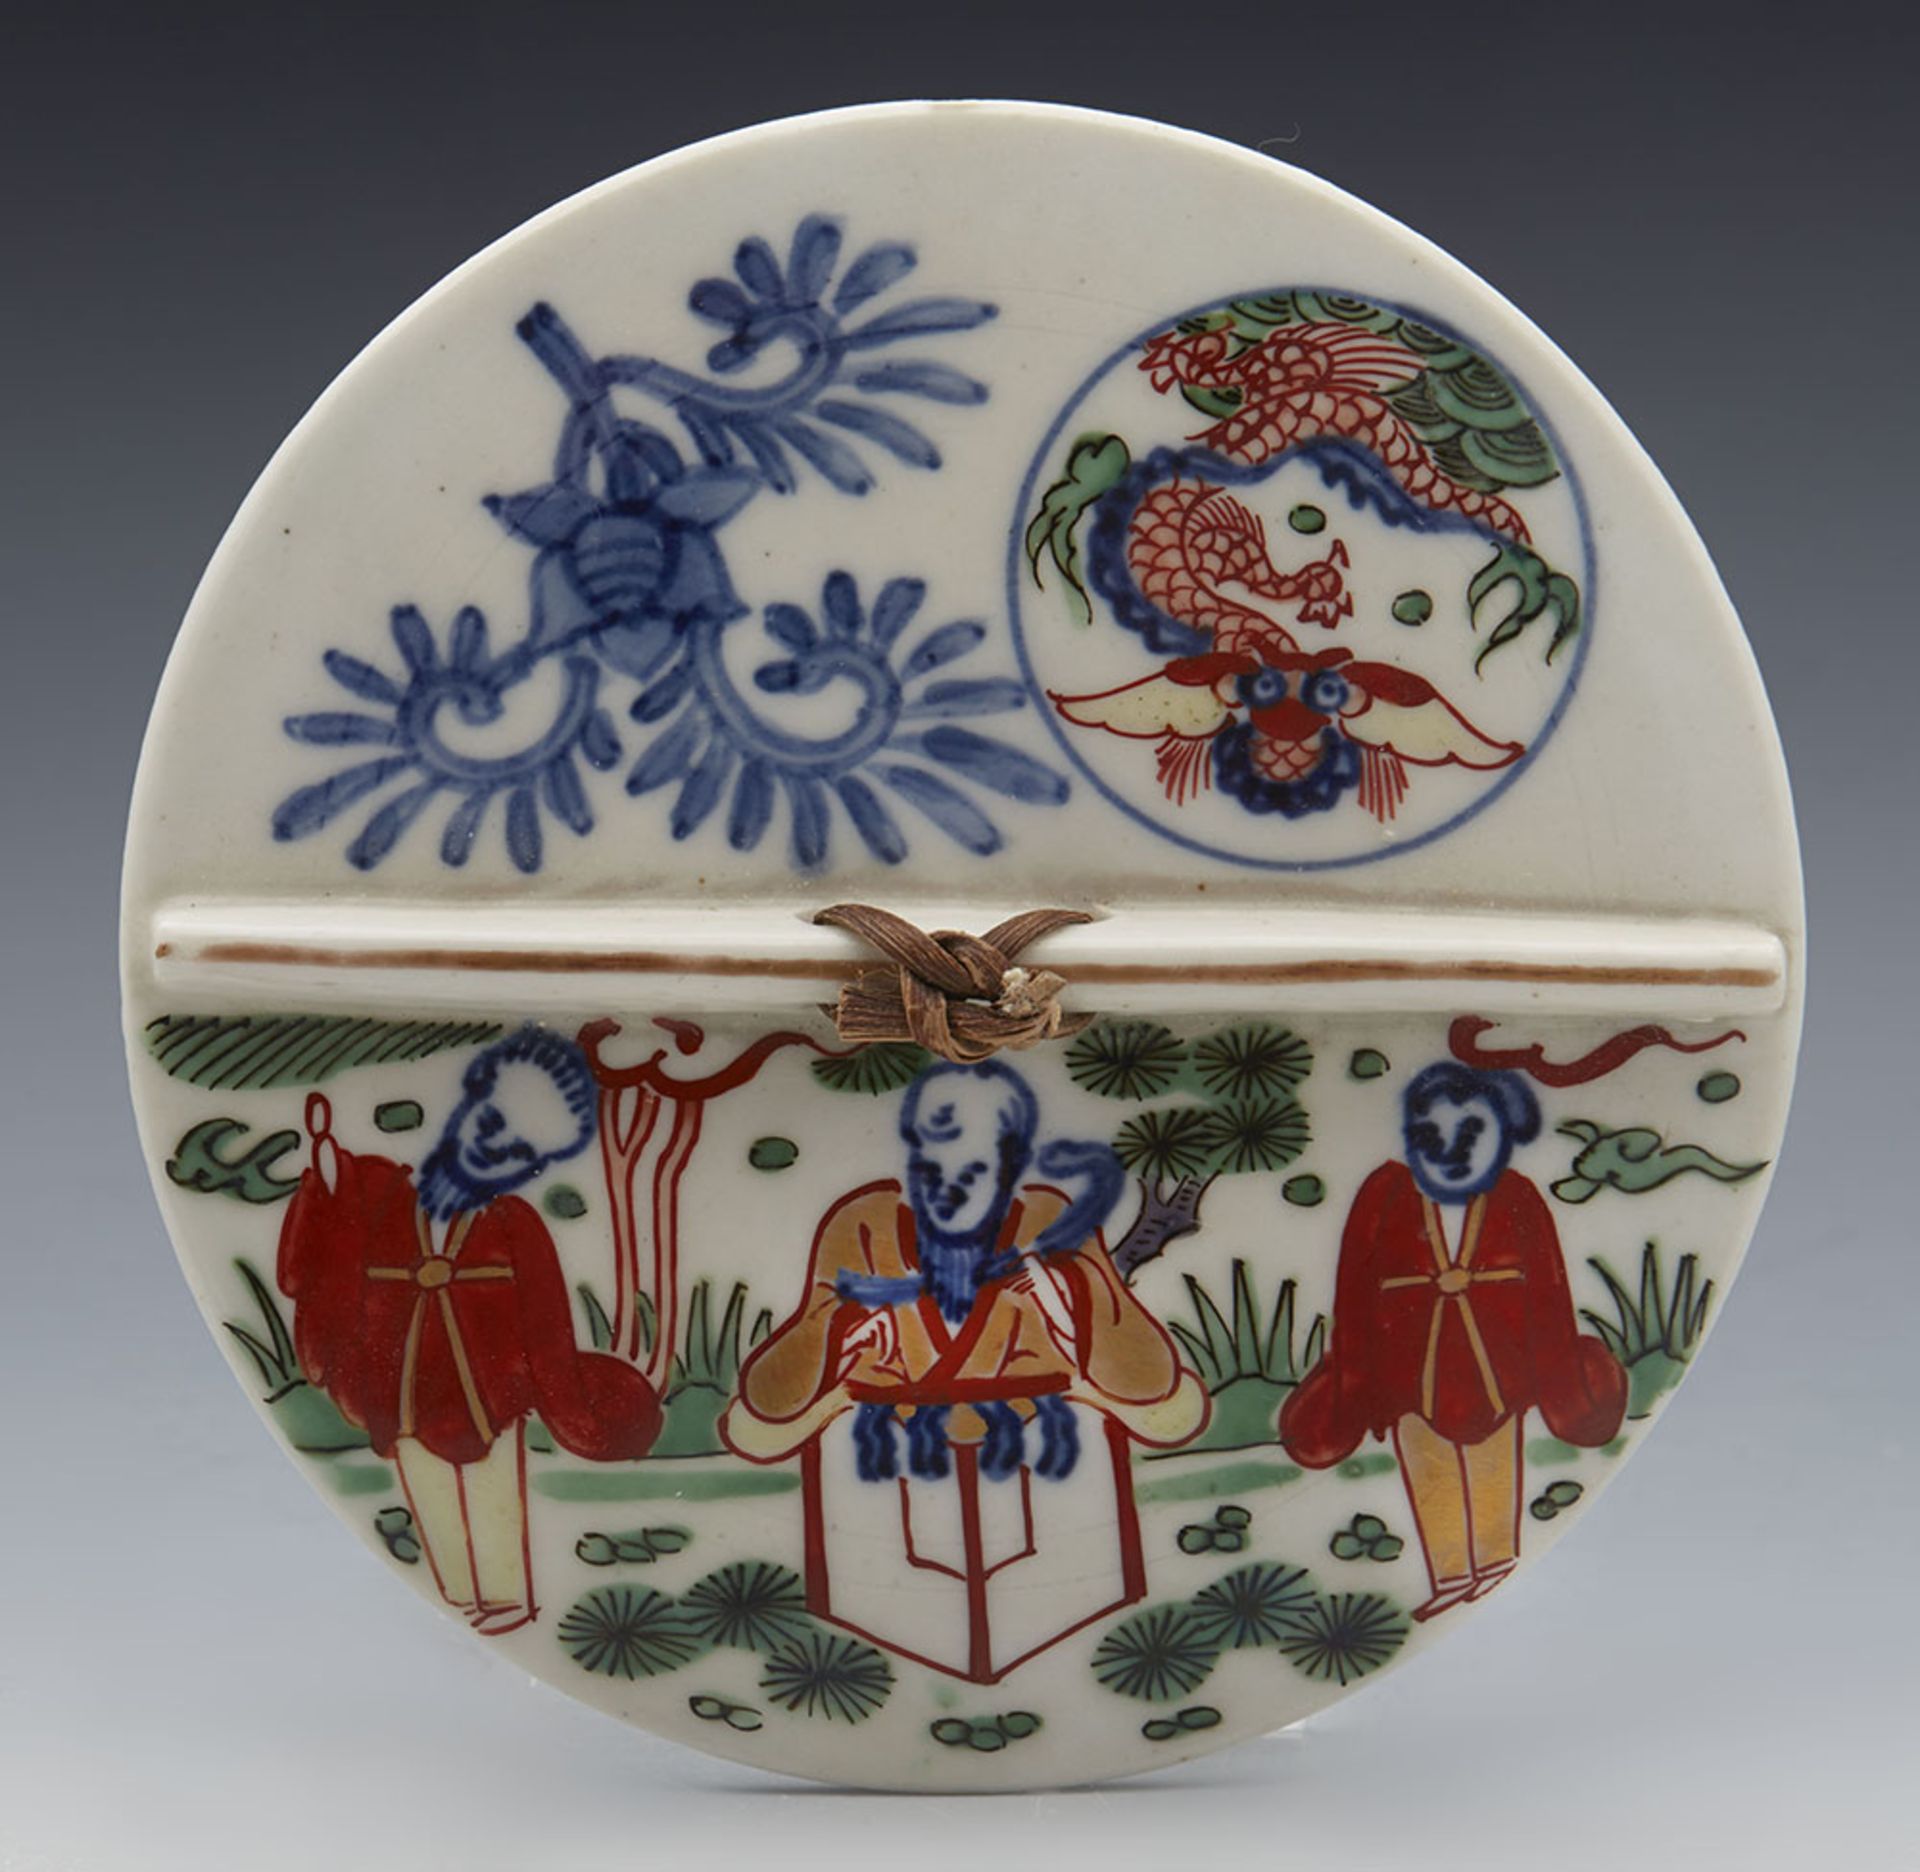 Superb Vintage Chinese Wucai Figural Lidded Rice Bowl With Dragons 20Th C. - Image 9 of 11